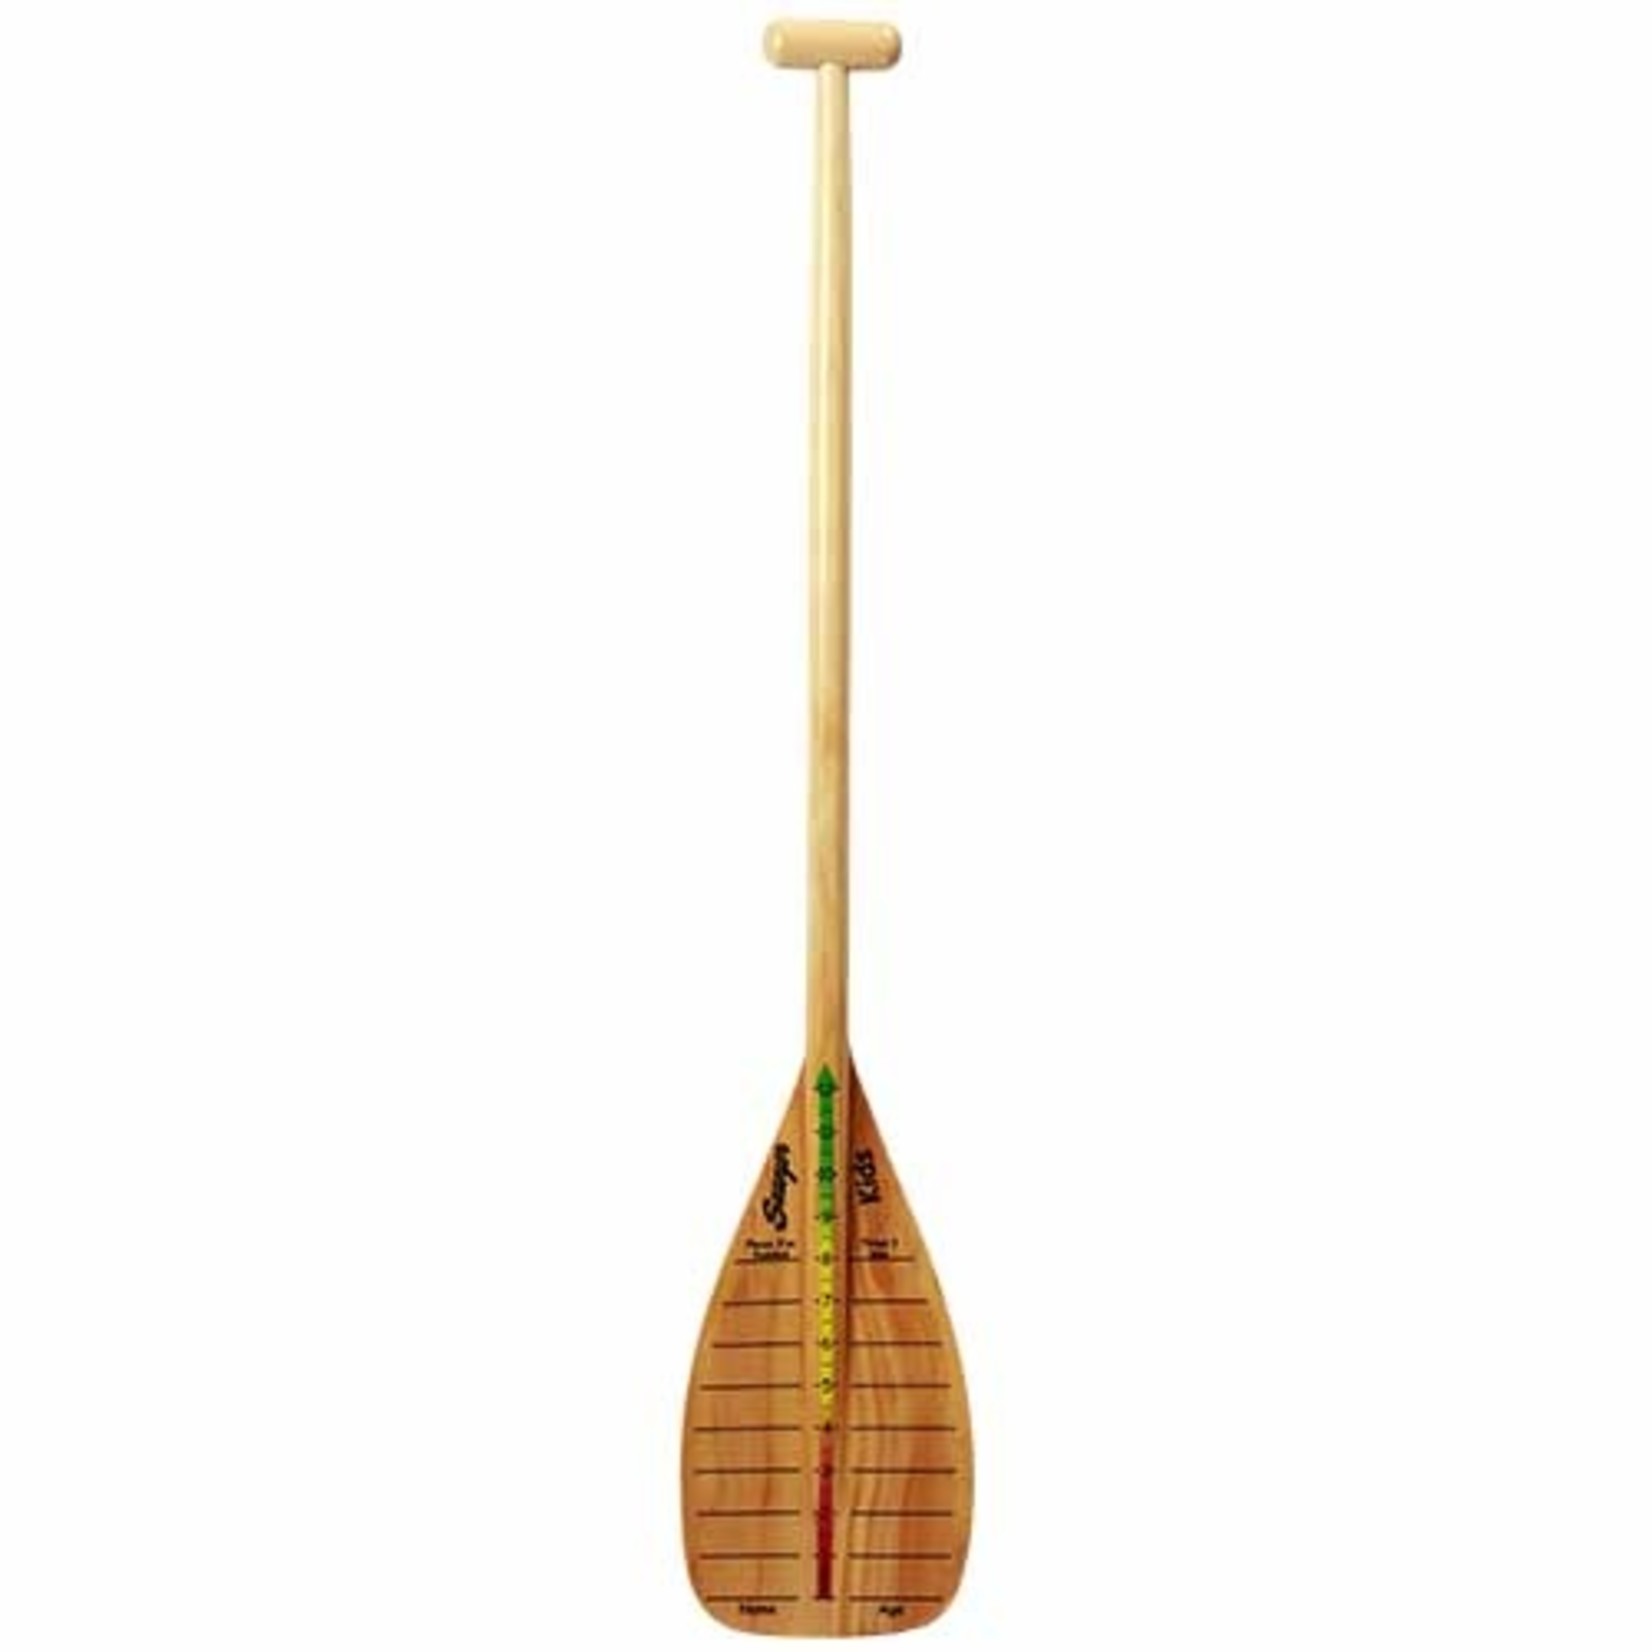 Sawyer SMBT Canoe Paddle - 48 in